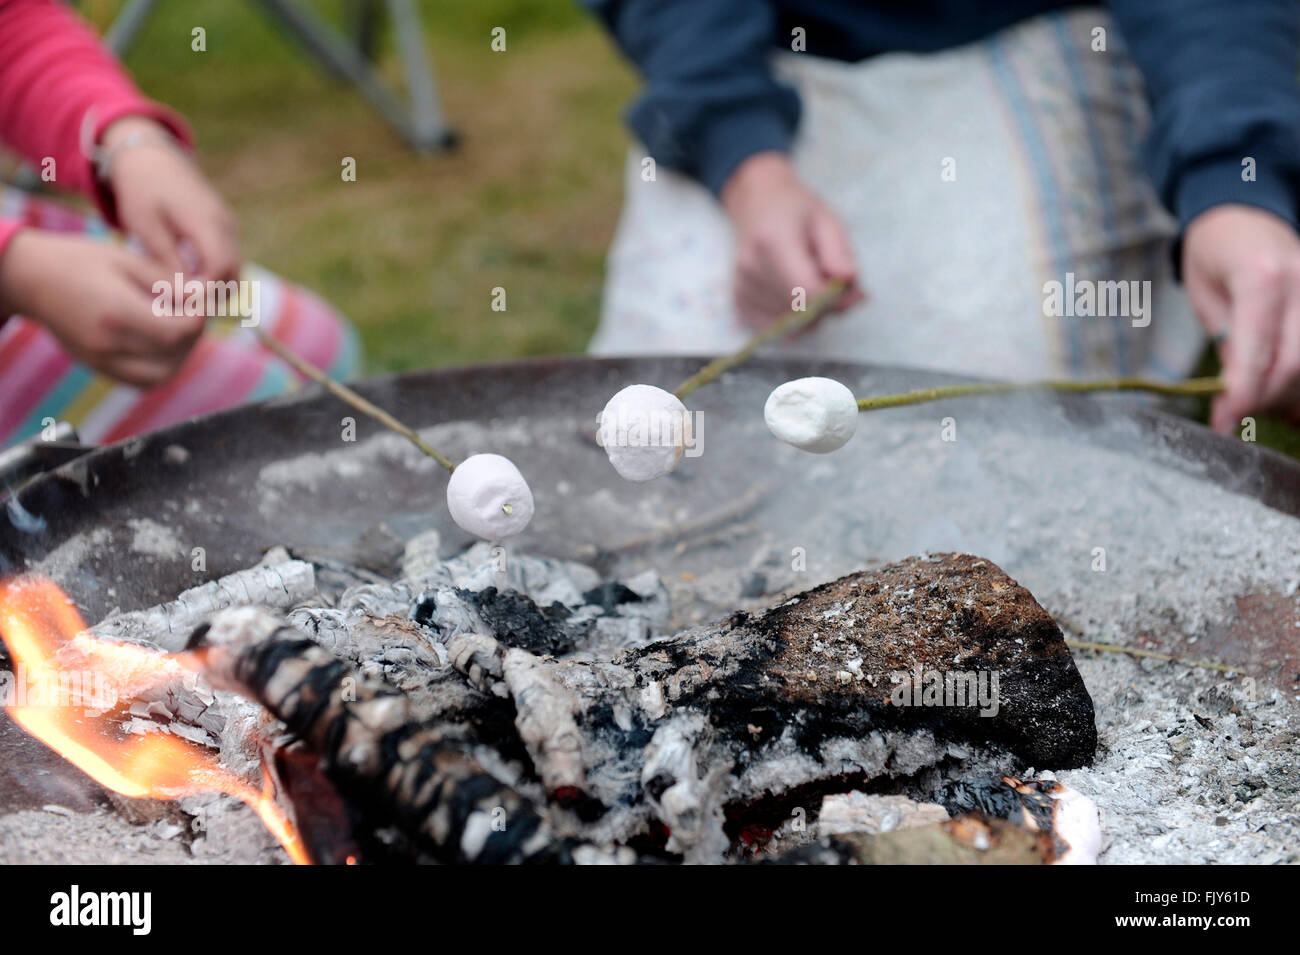 Roasting marshmallows on an open fire, uk campng Stock Photo